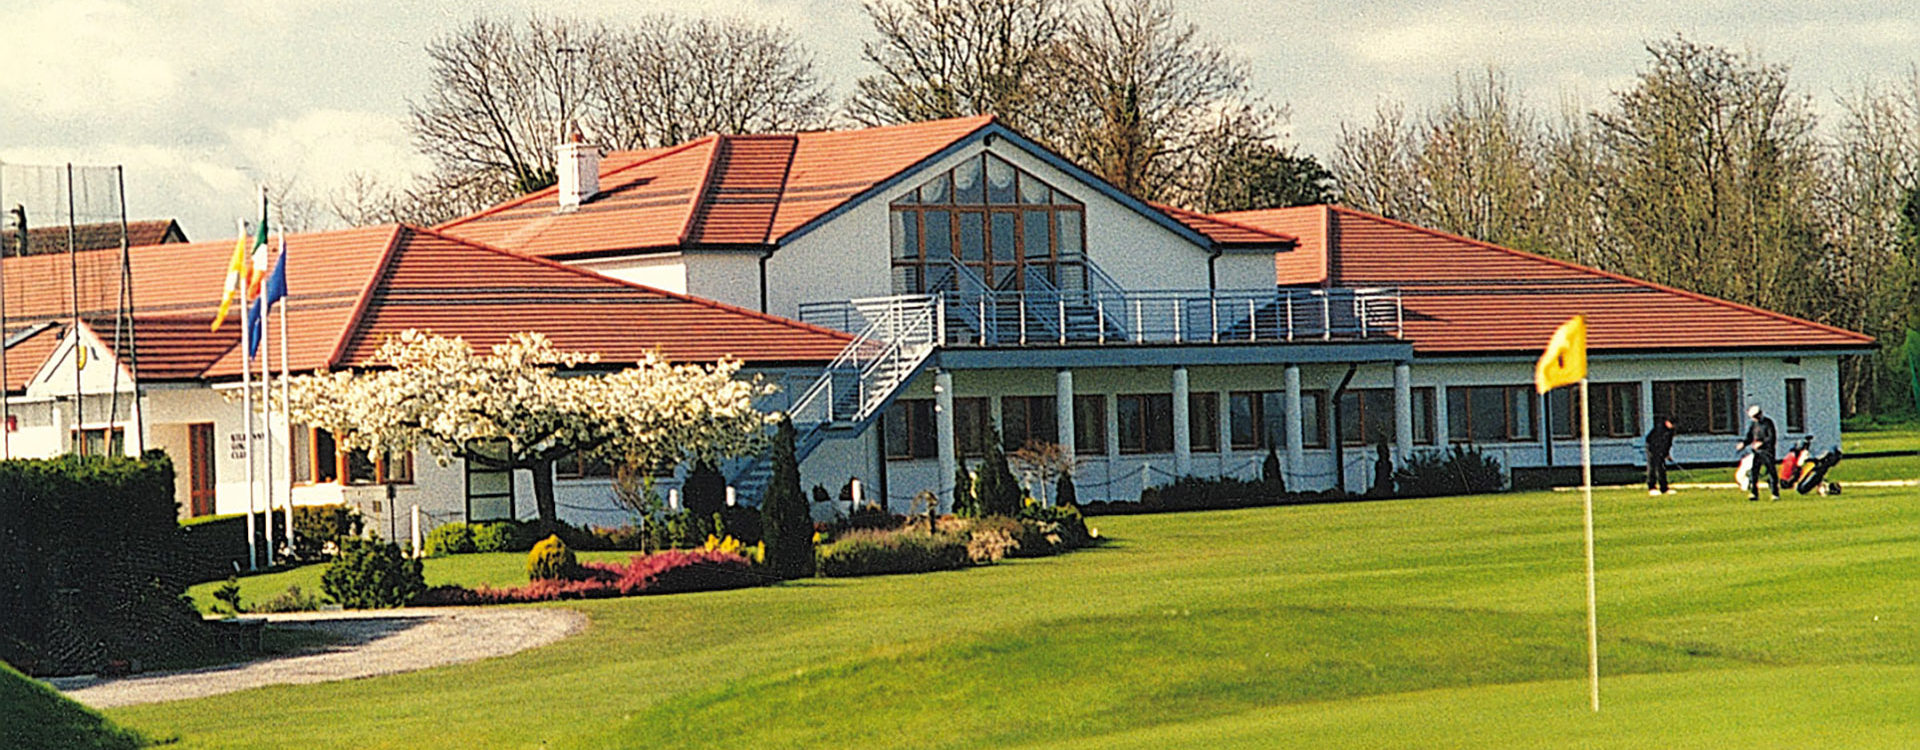 Open Competitions - Bray, brighten-up.ukw, Ireland - Bray Golf Club